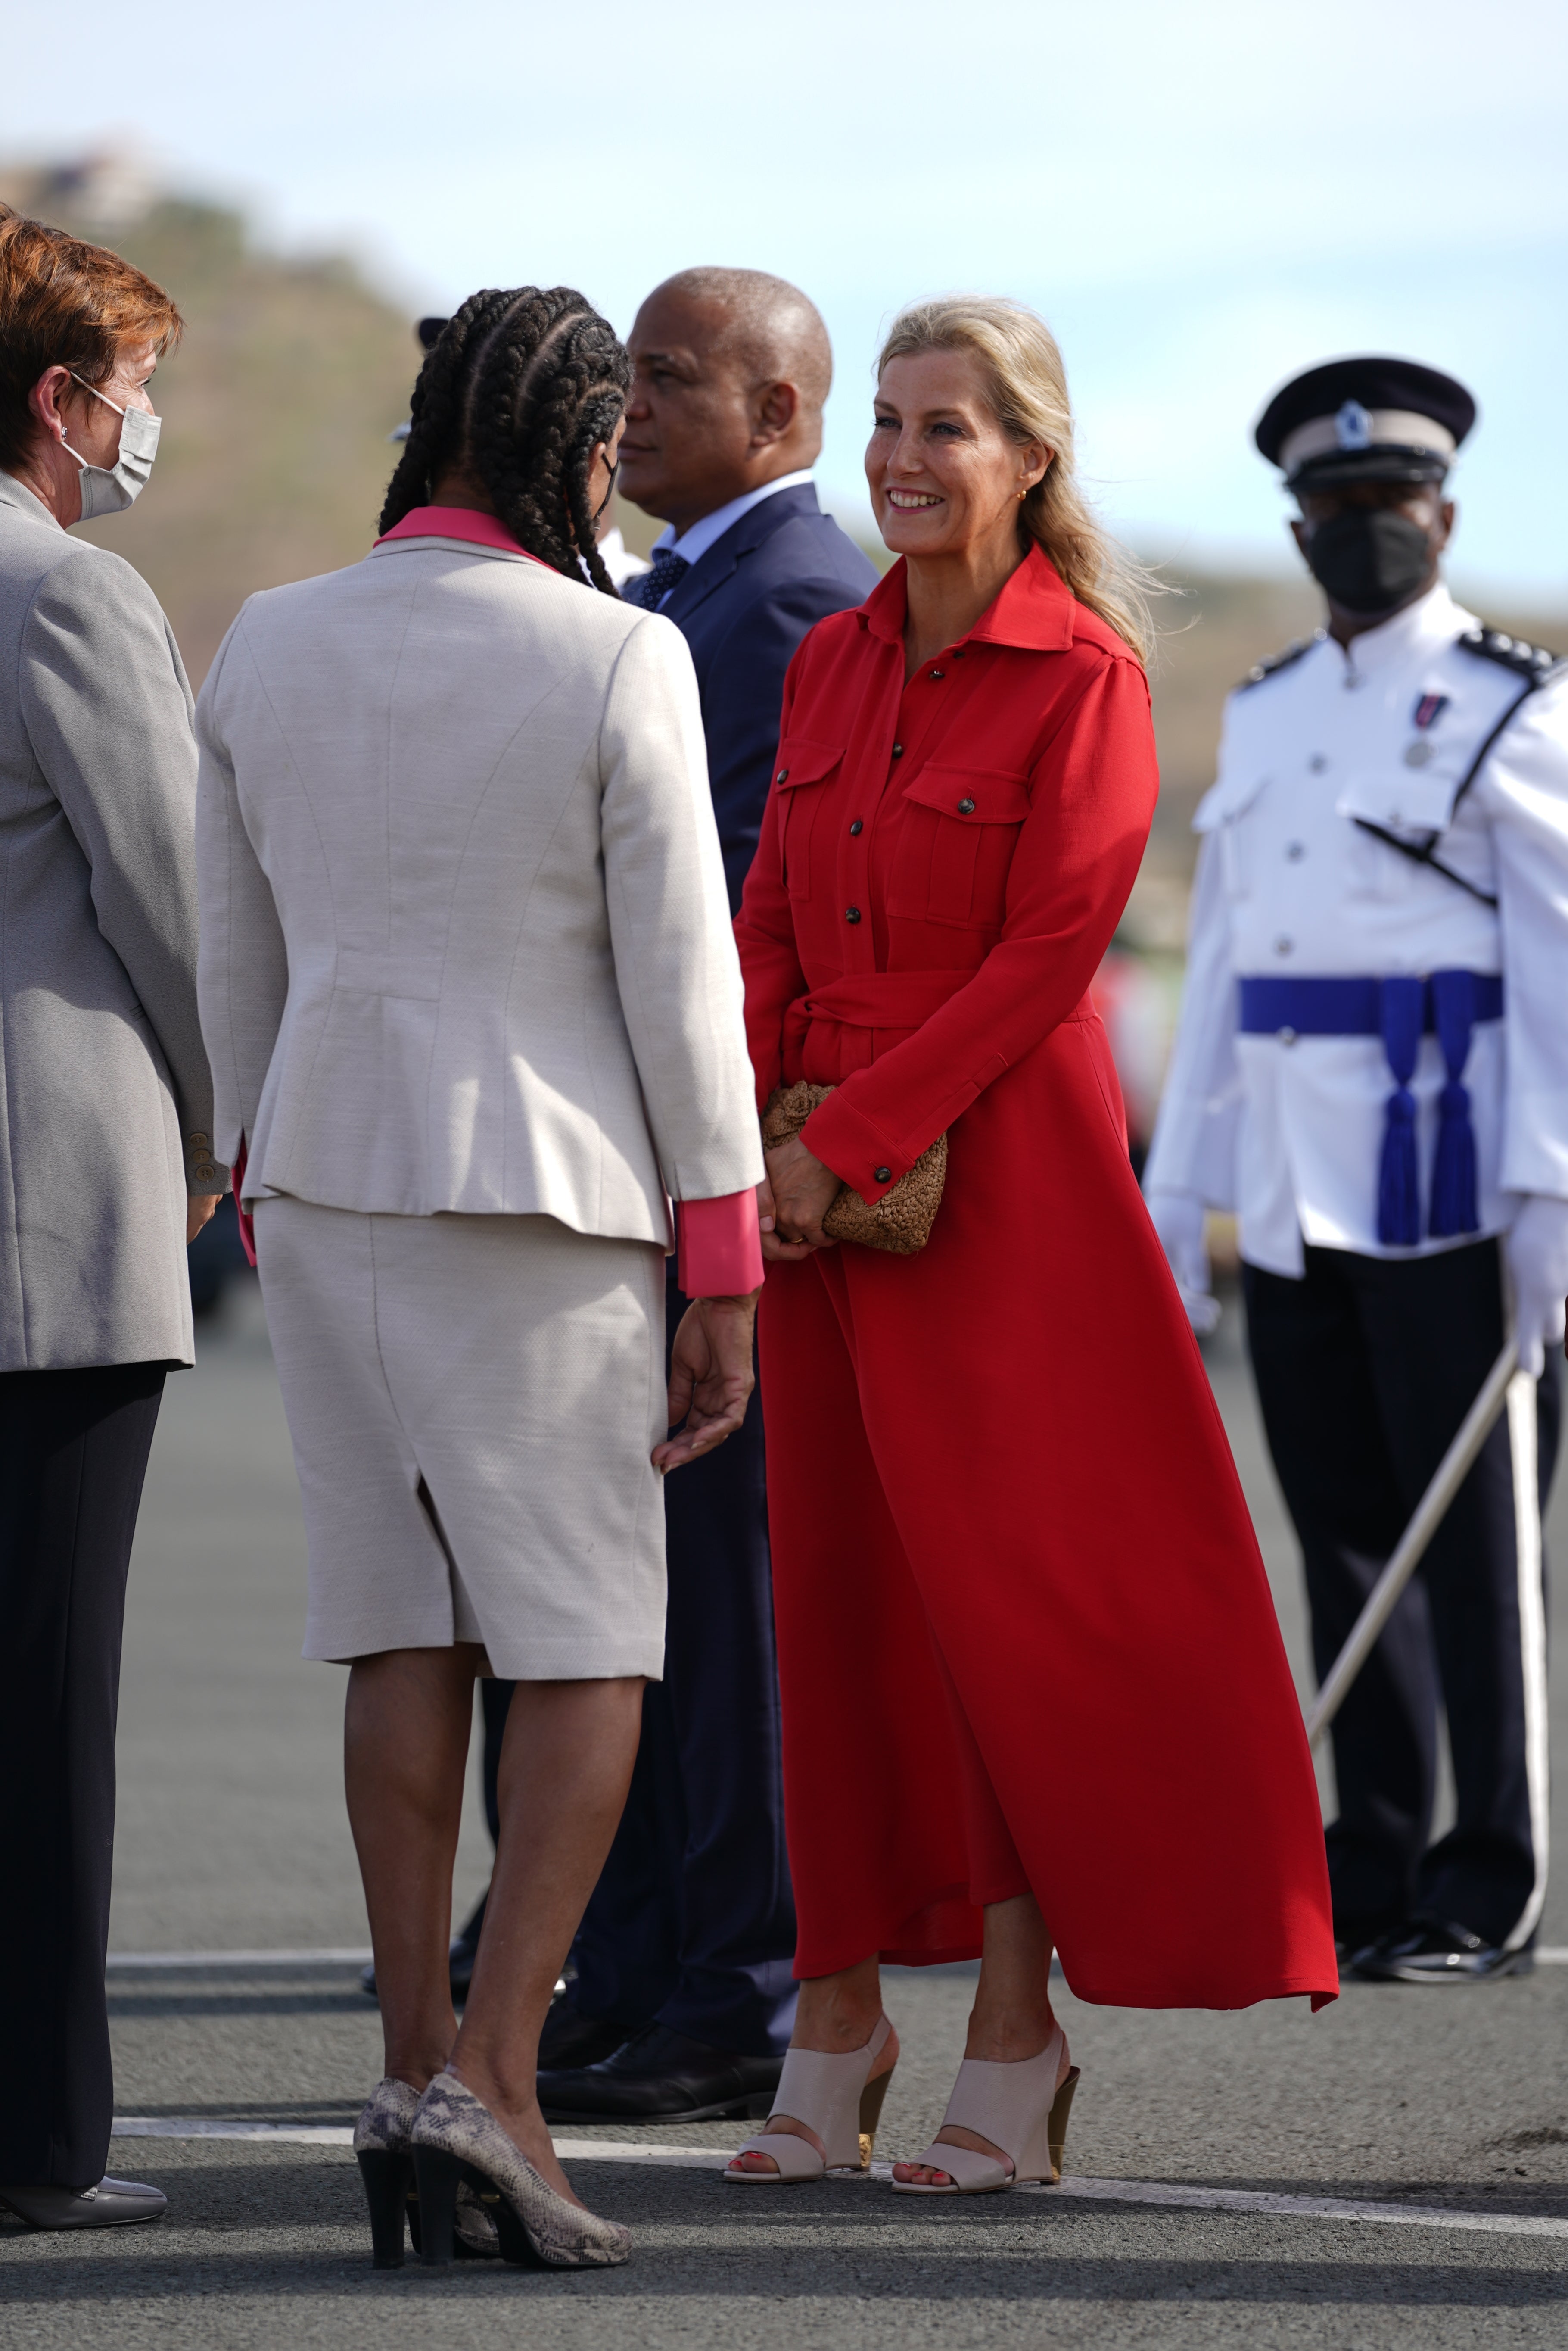 The Countess of Wessex, who is accompanying her husband the Earl of Wessex, arrives at Hewanorra International Airport in St Lucia (Joe Giddens/PA)